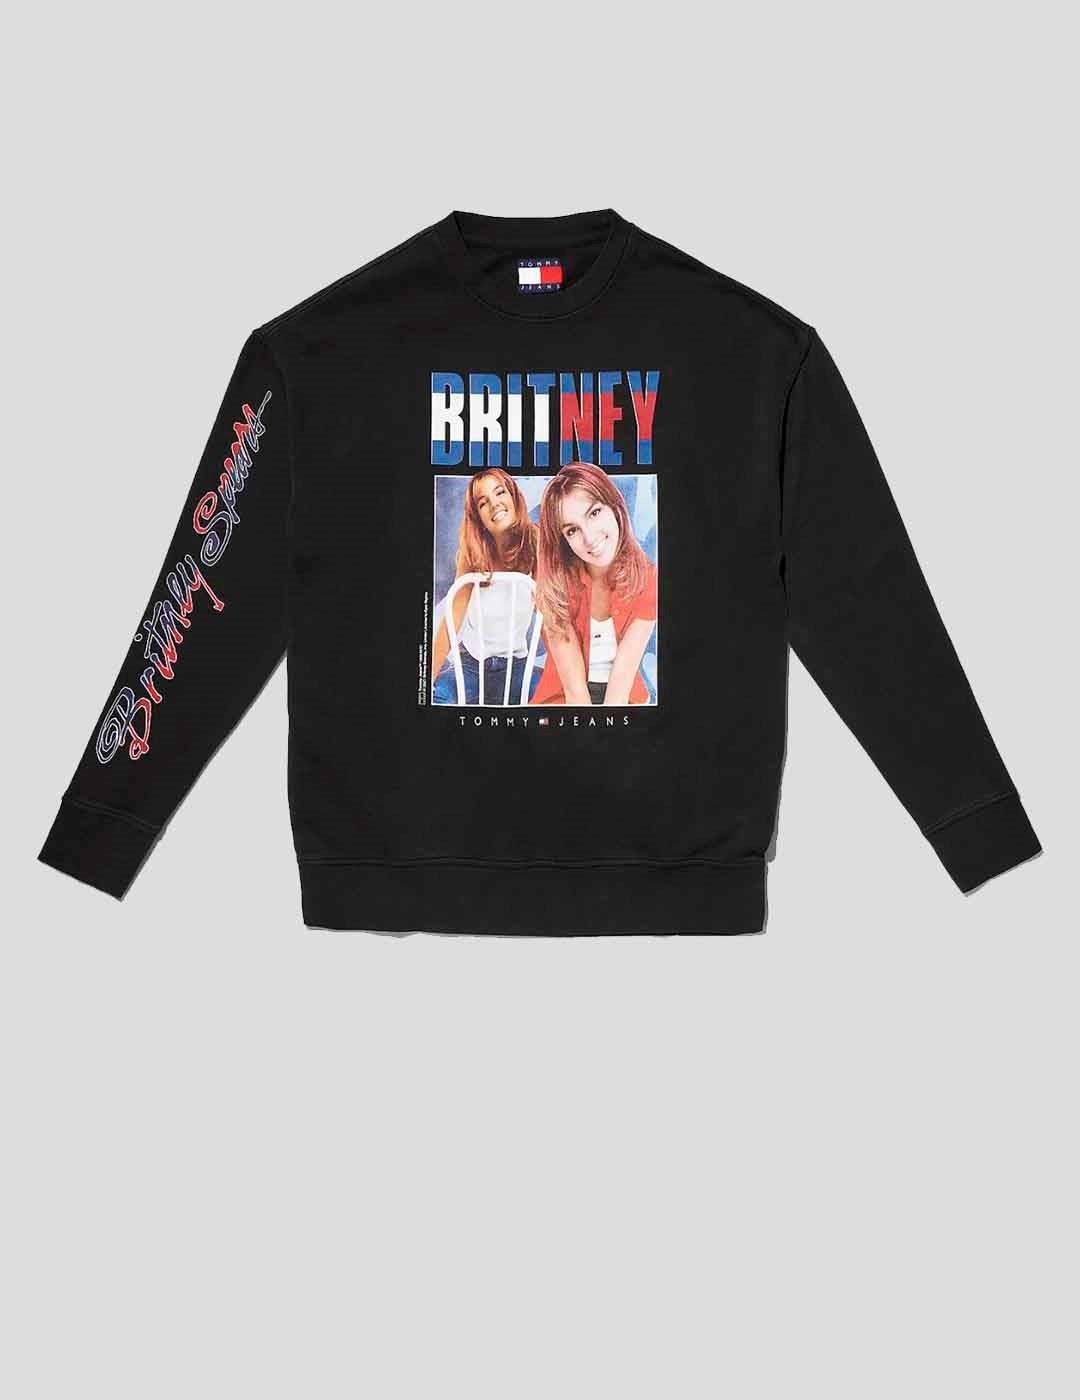 SUDADERA TOMMY JEANS BRITNEY SPEARS REVISITED W CREW BLACK